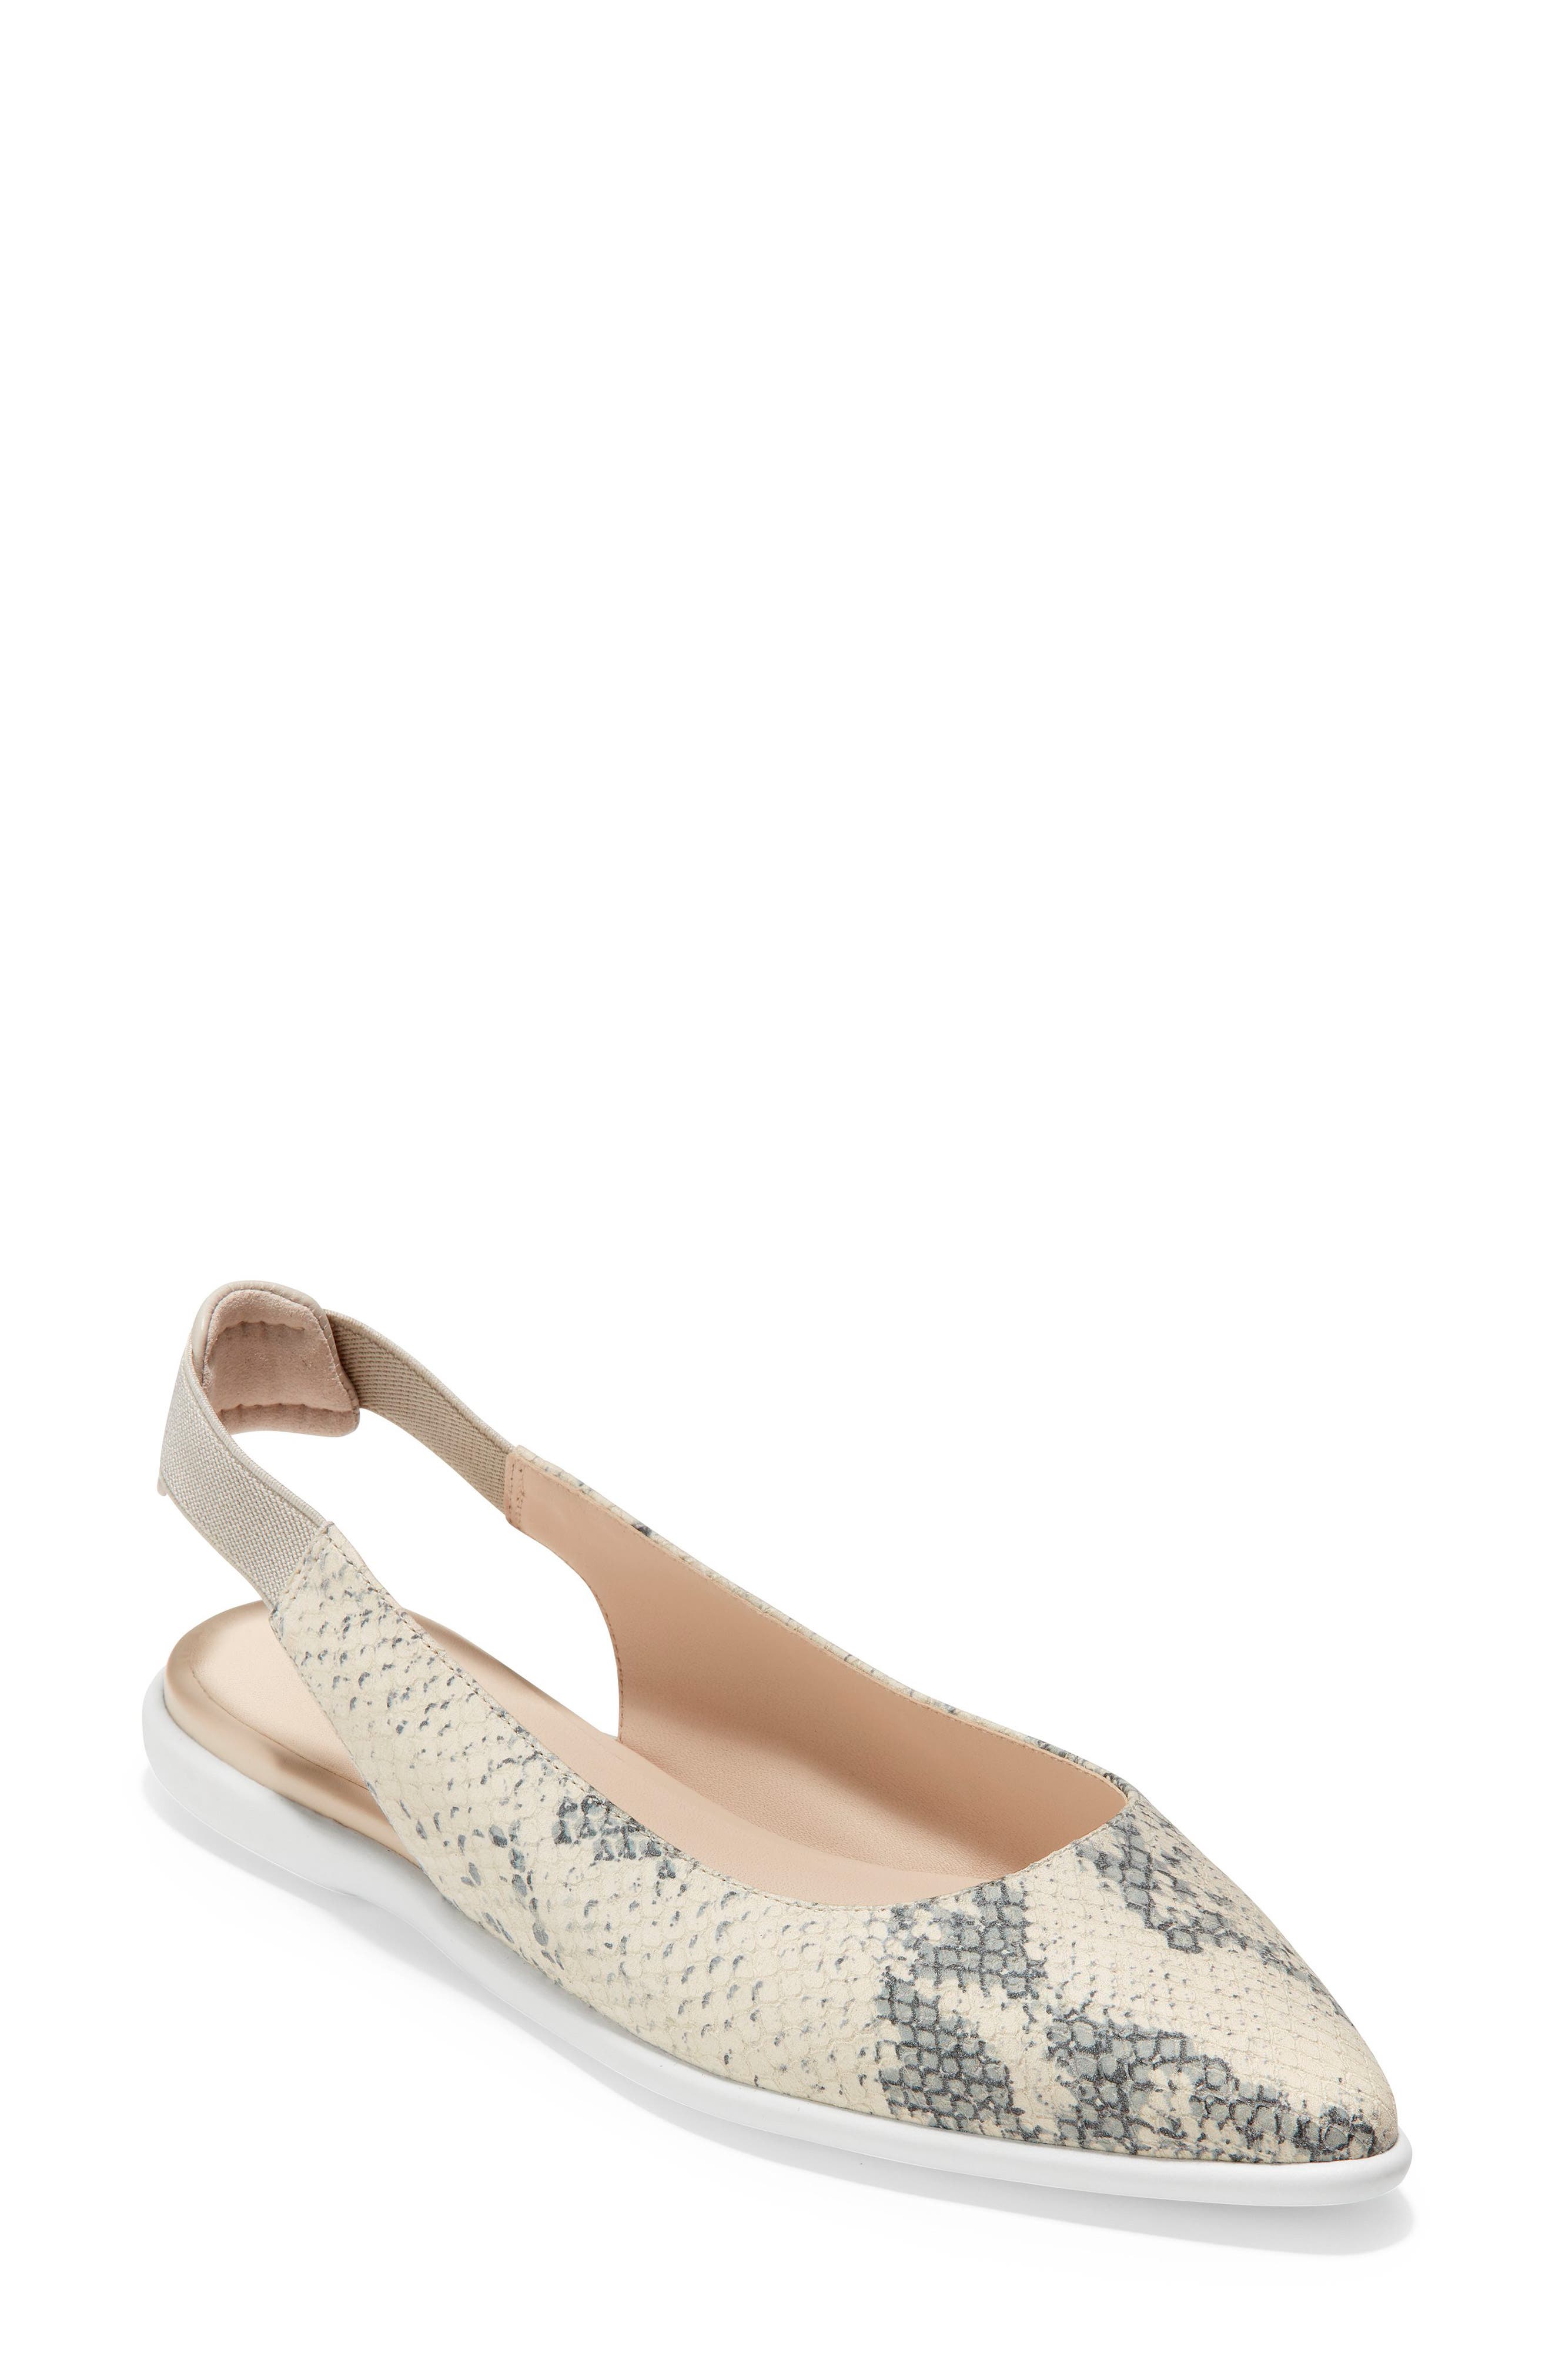 cole haan snake print shoes